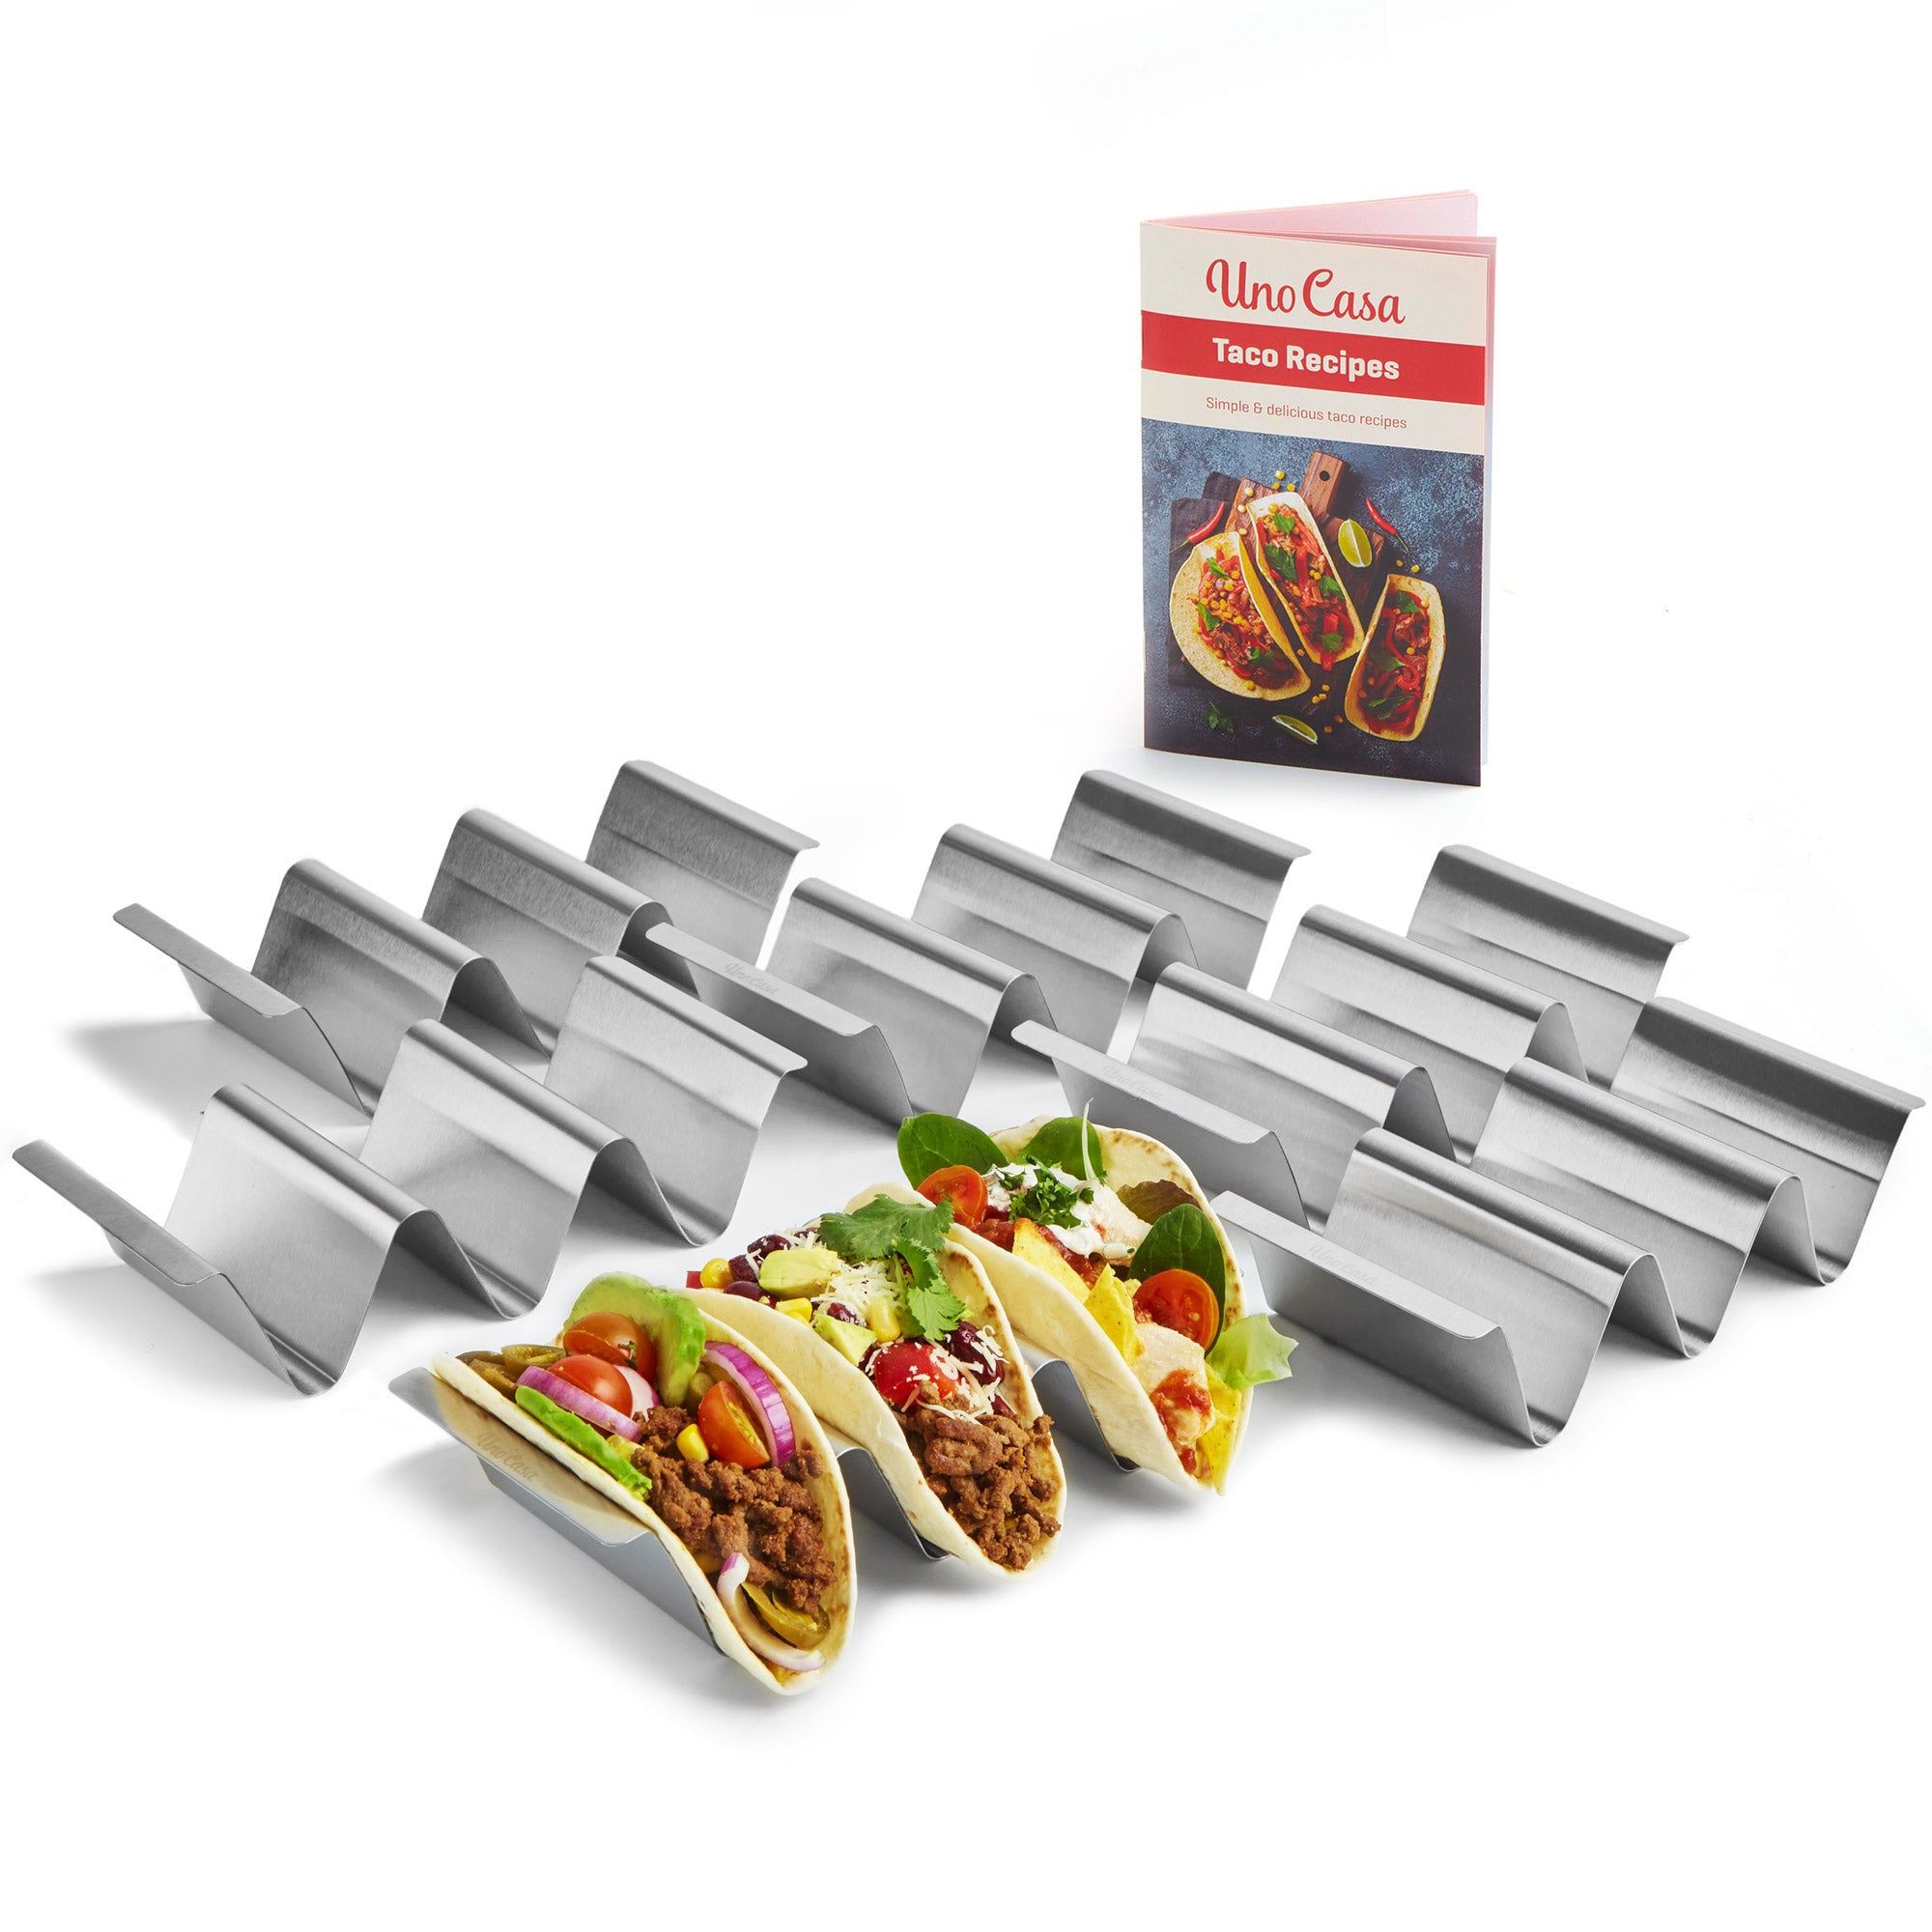 6 taco holders and recipe book